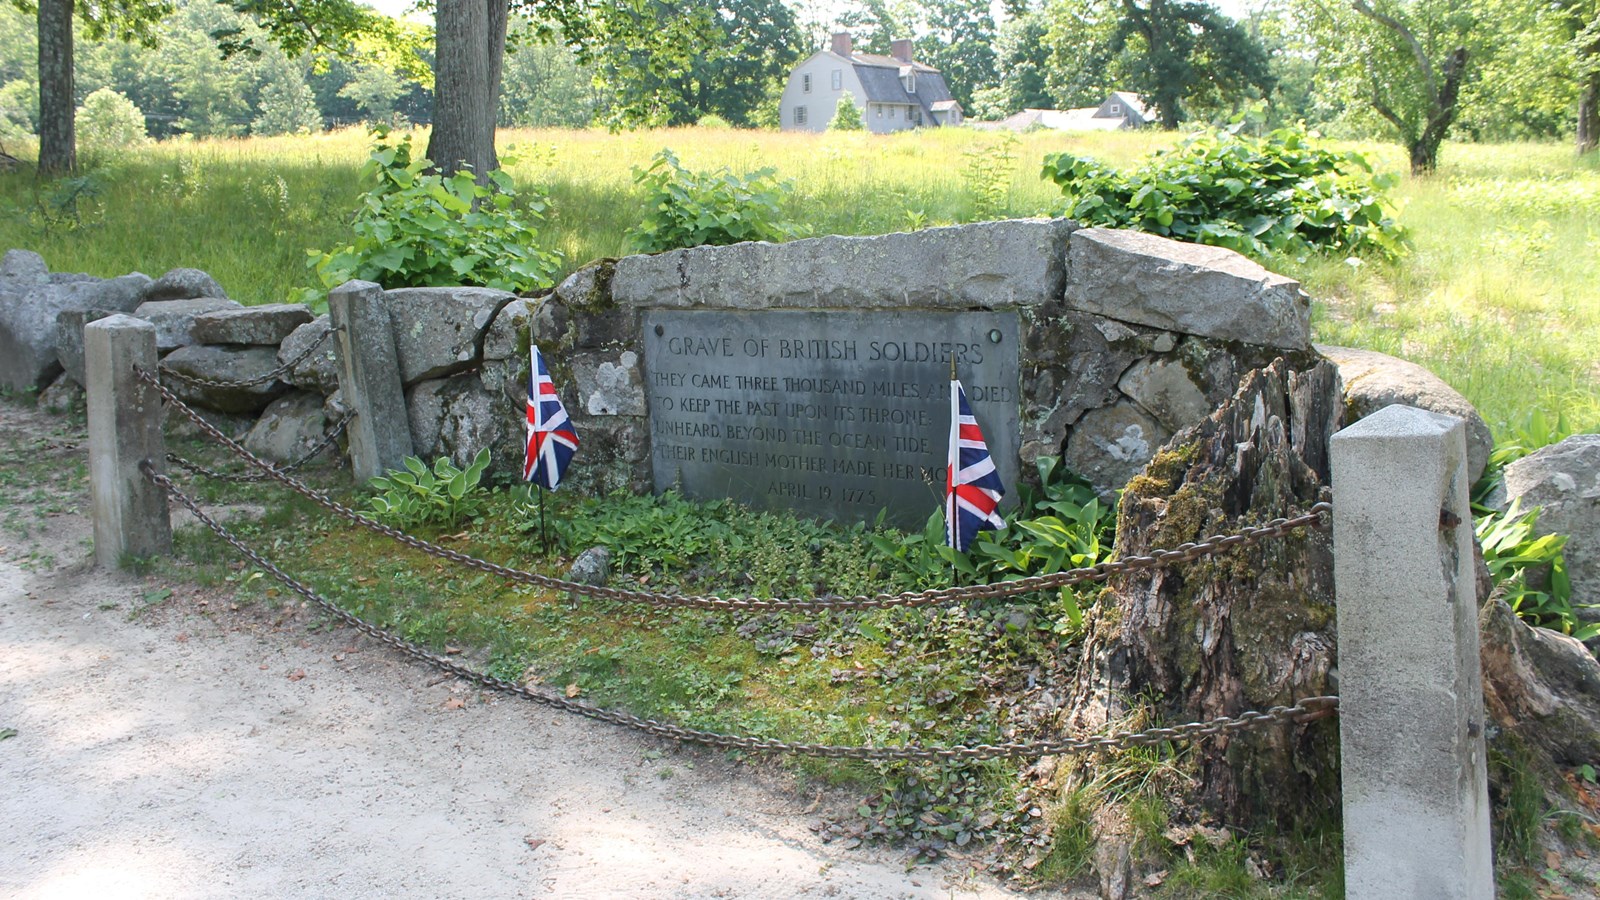 A gravestone is imbedded into a low stonewall surrounded by fencing and green grass.